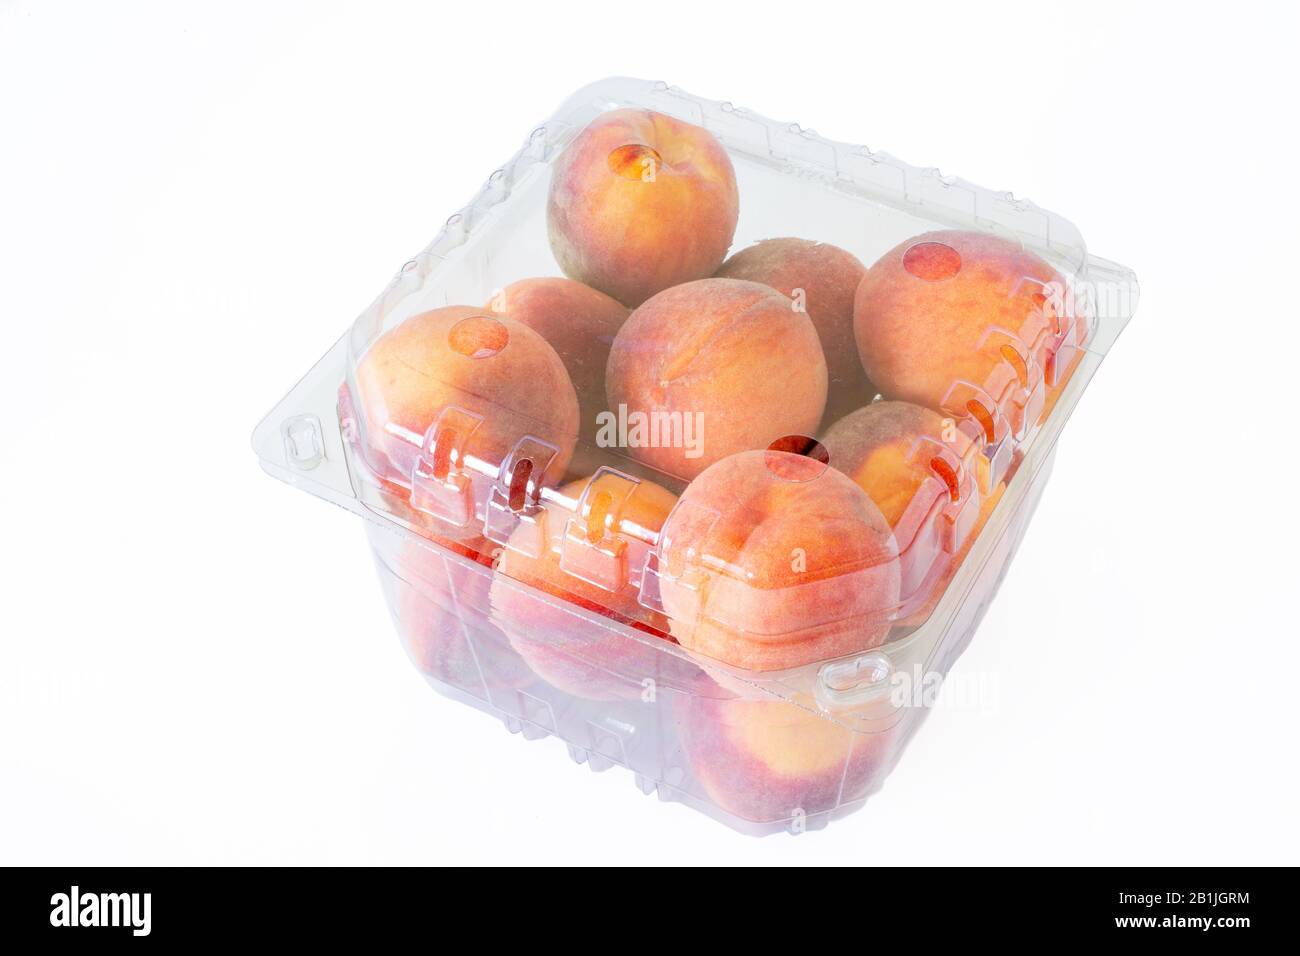 Peaches for sale in clear plastic cellophane boxes. Stock Photo